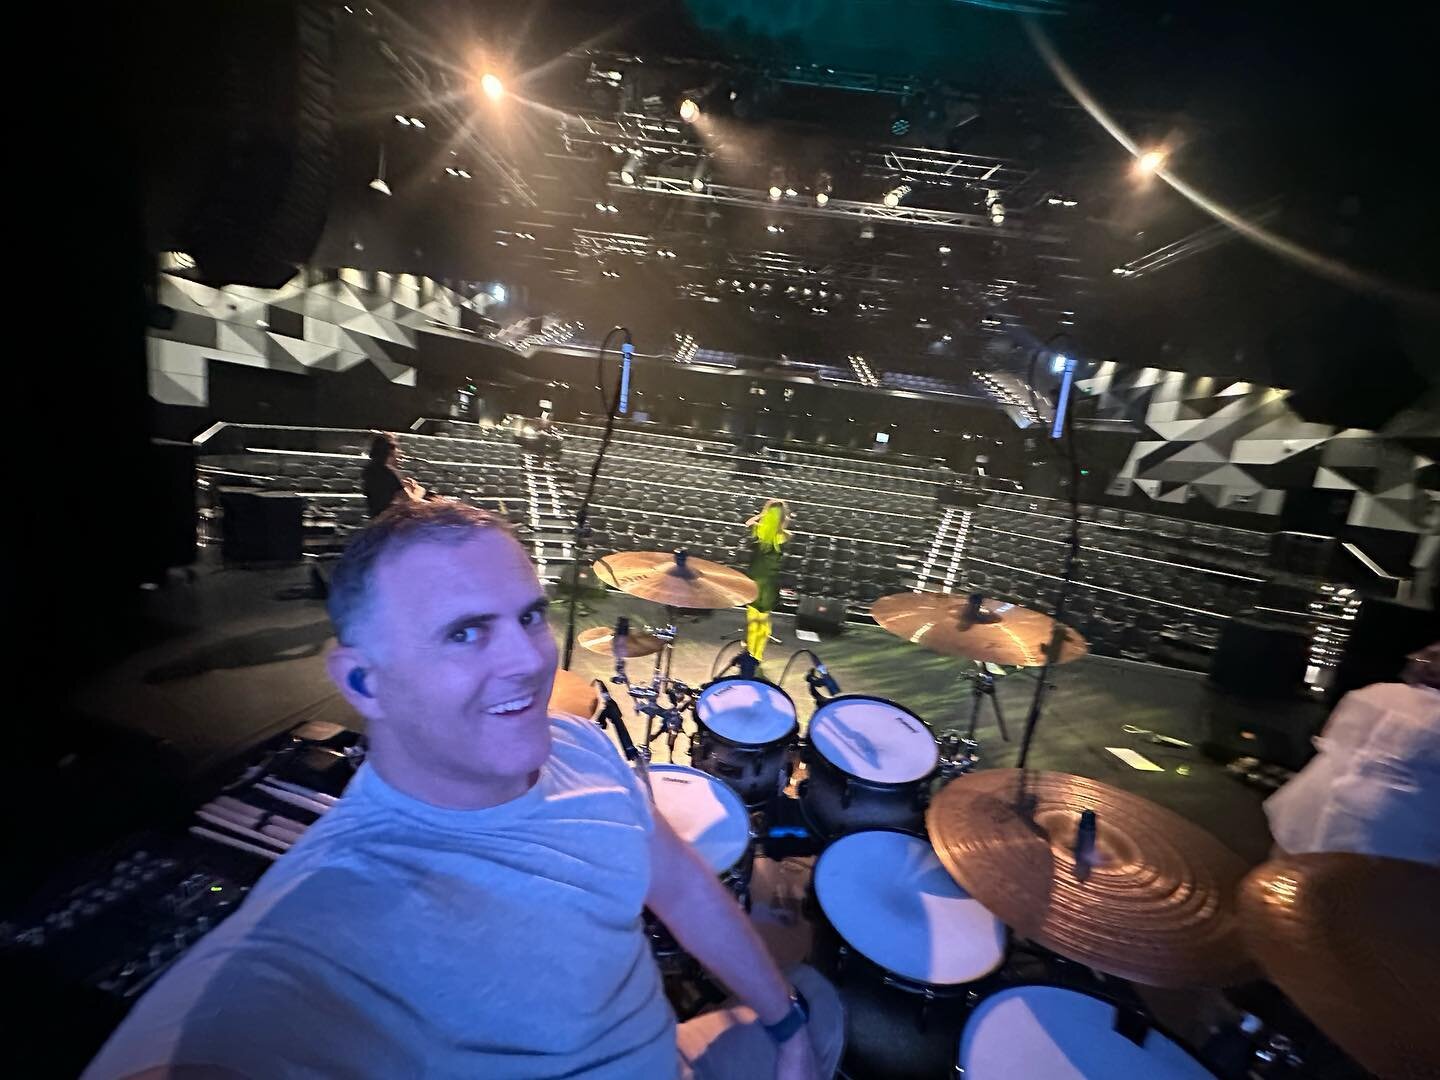 Performed in Penrith panthers theatre on the weekend to a big crowd. A lot of fun doing these performances in theatres like this!
#drums #drumming #drummer #australianfleetwoodmac #runningintheshadows #percussion